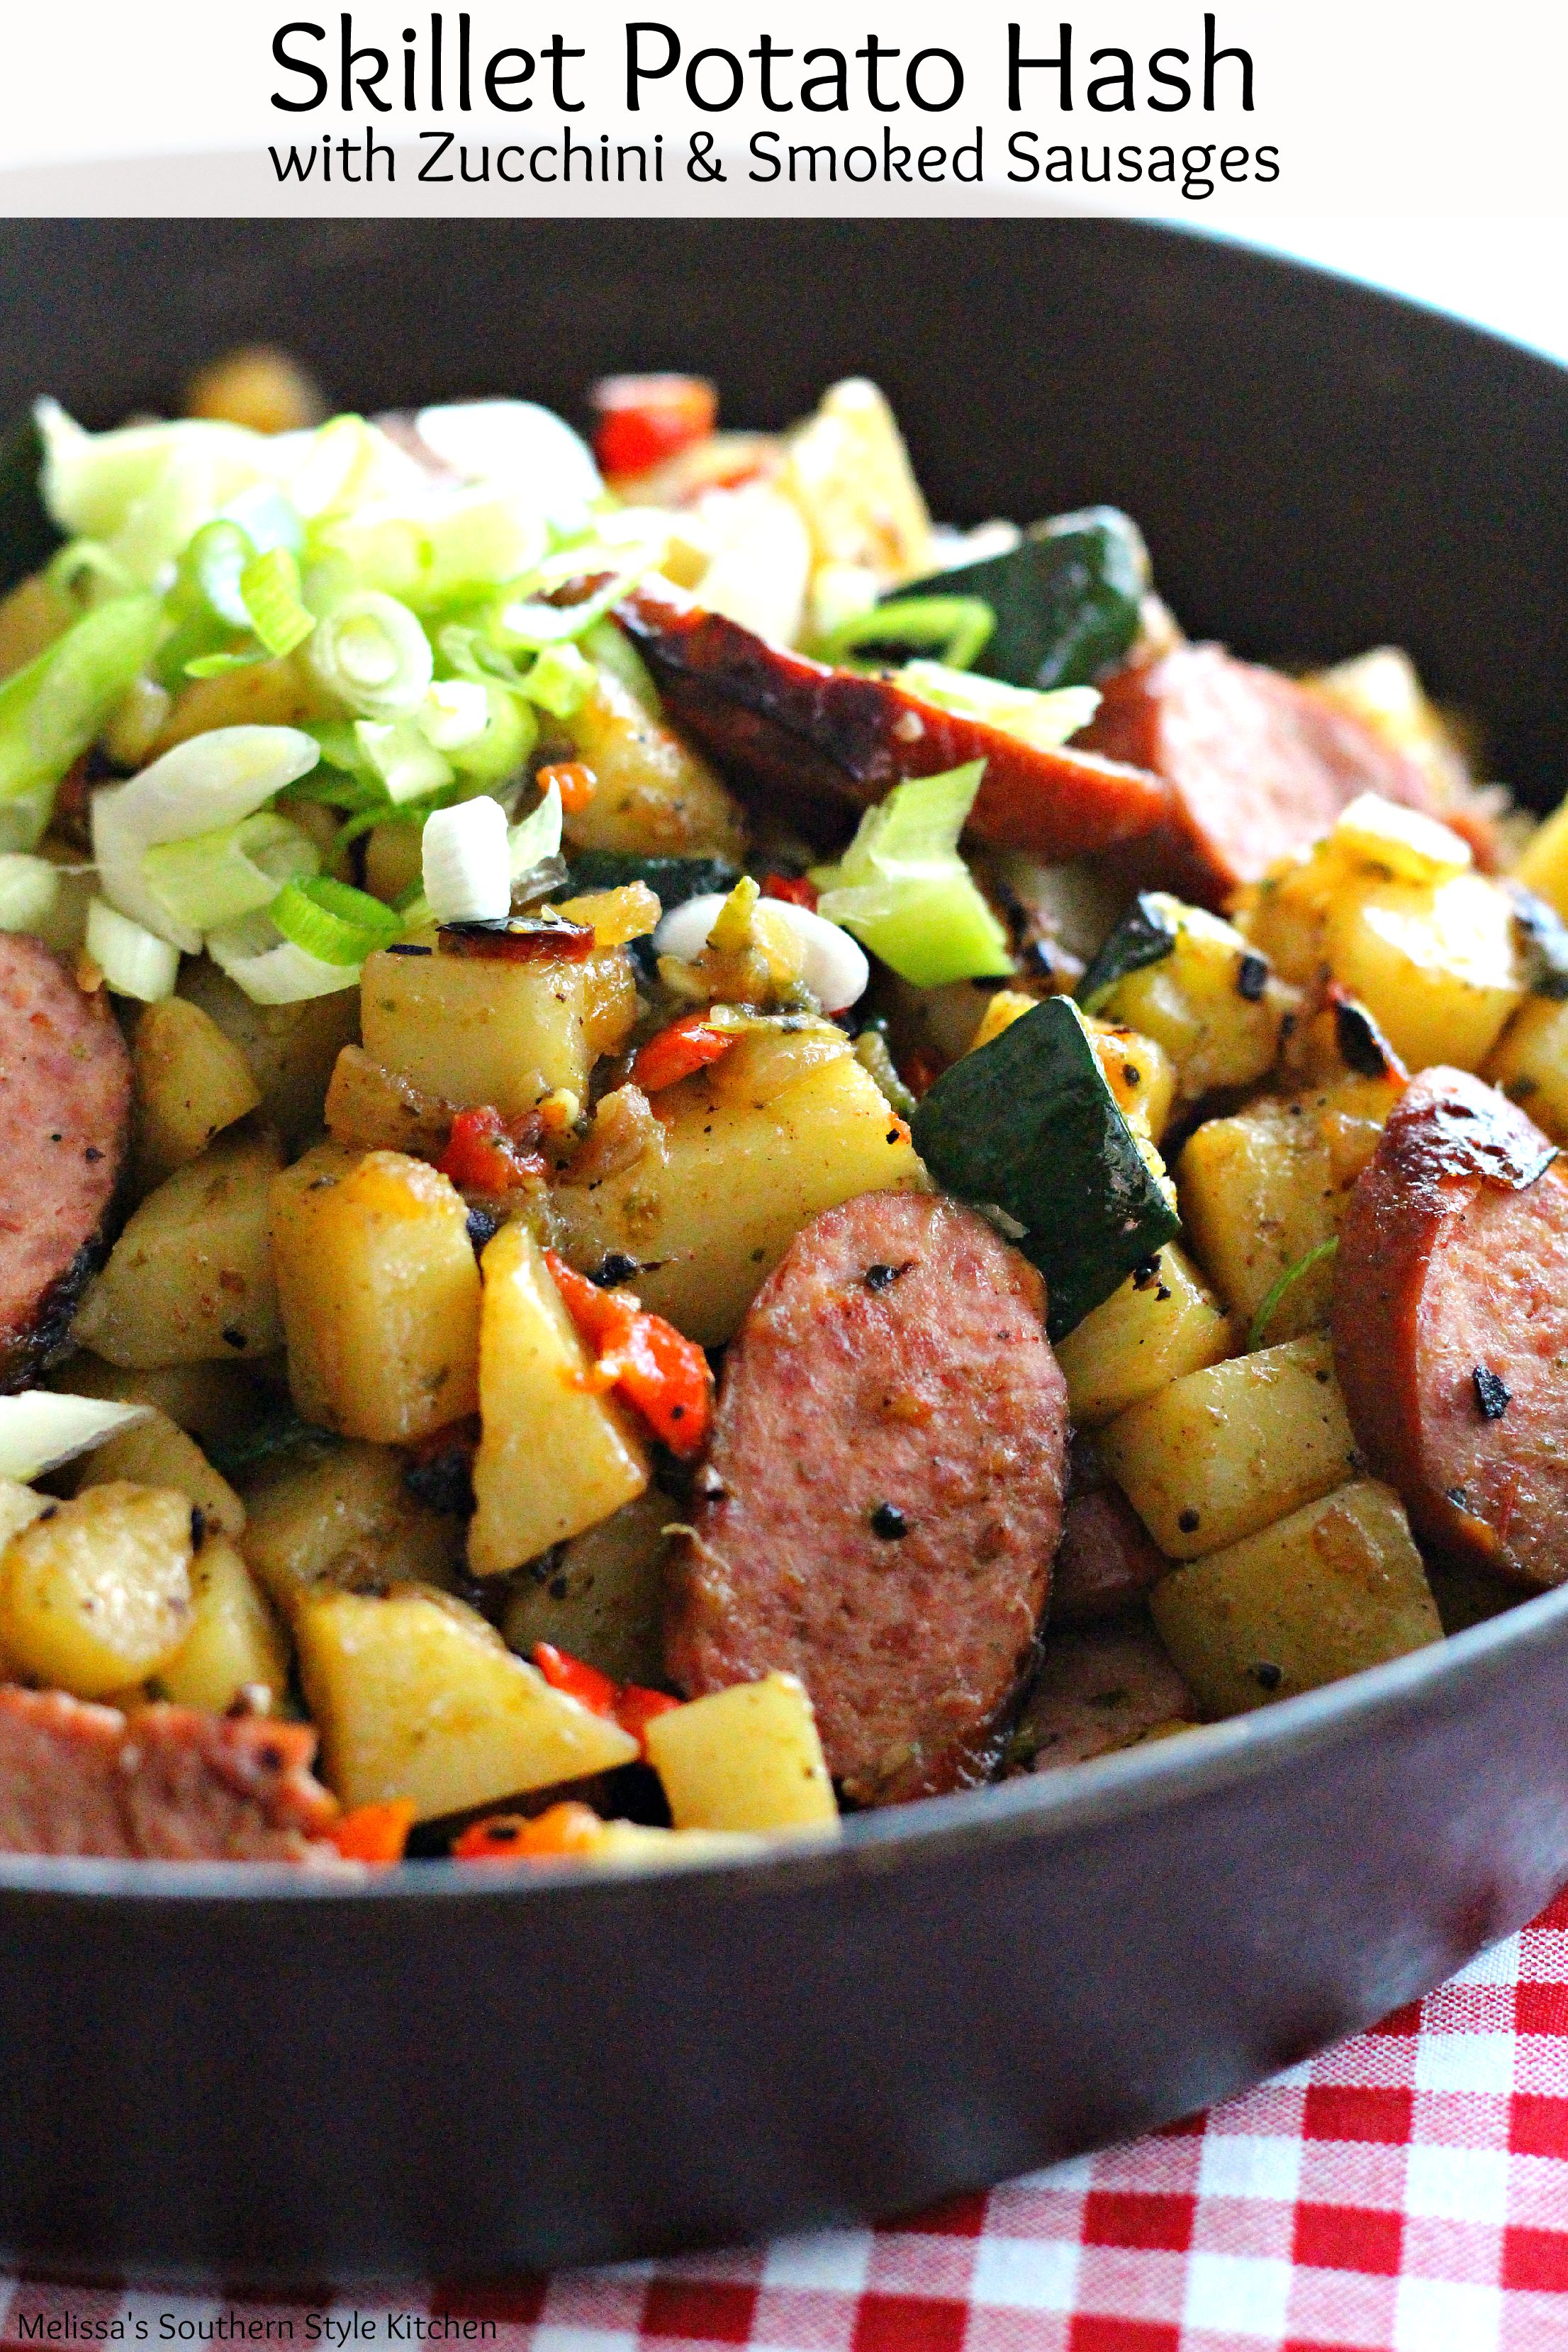 Potatoes and sausages in a skillet